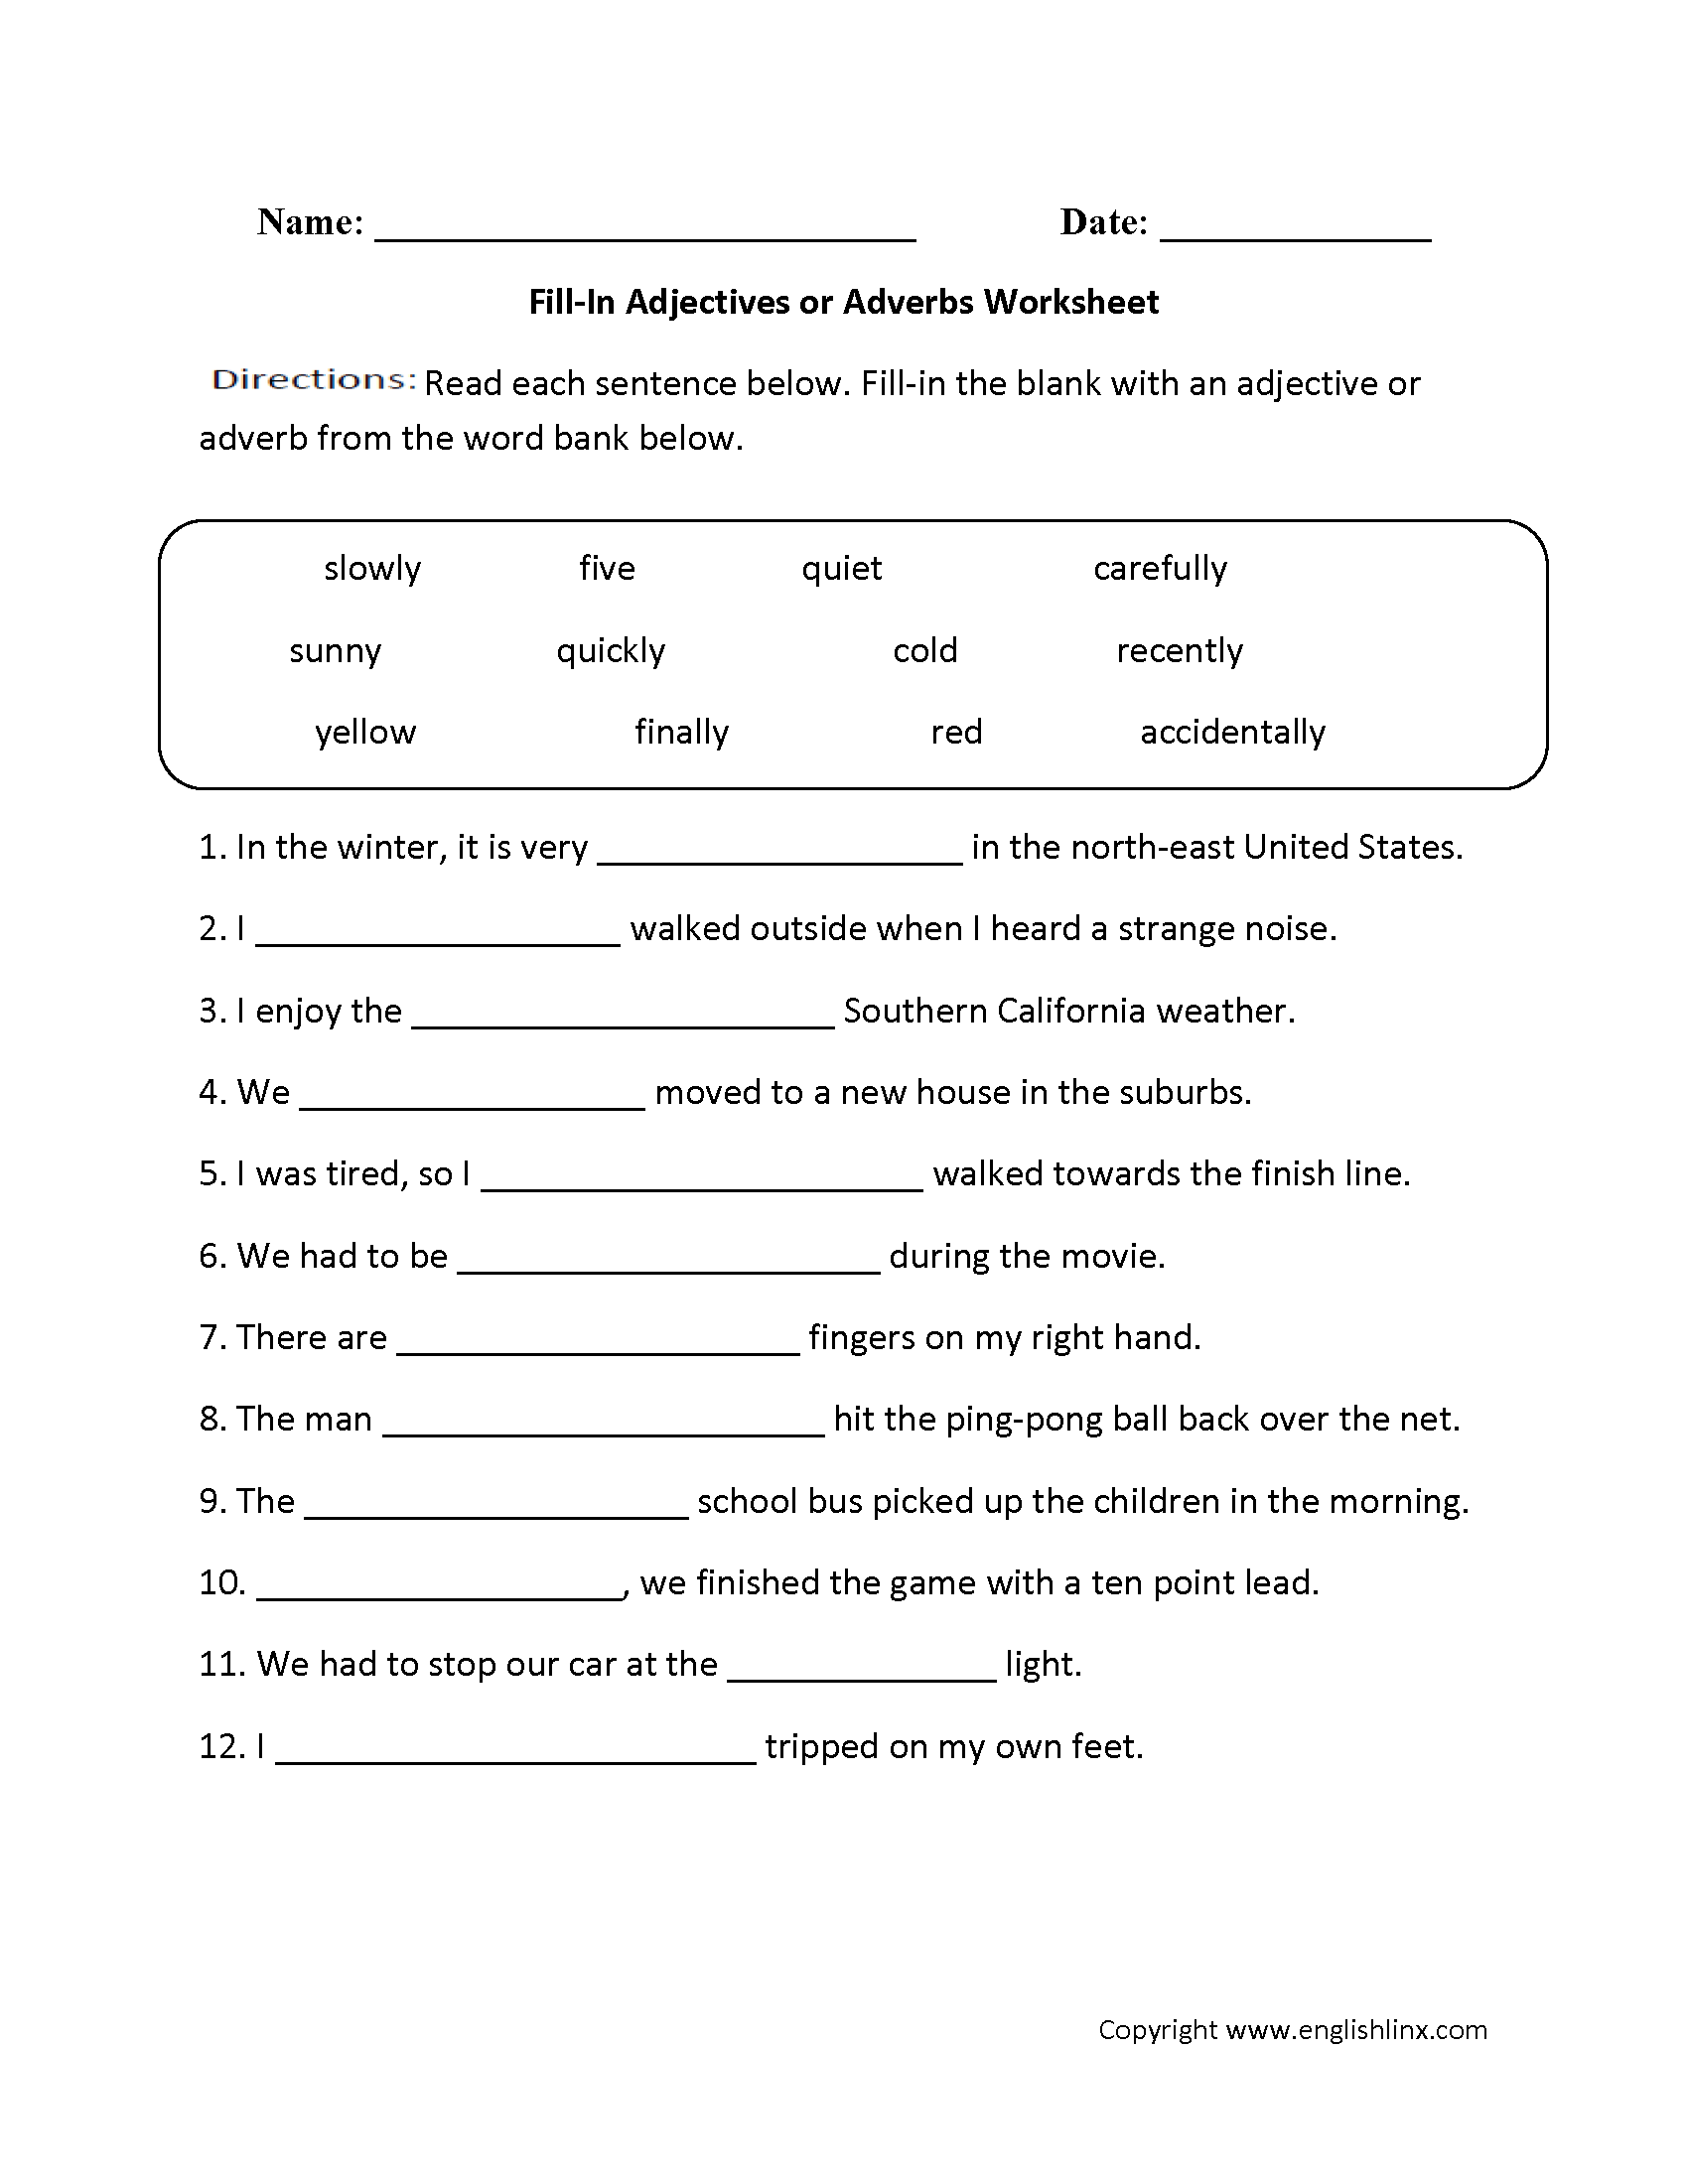 Adjective Or Adverbs Worksheet